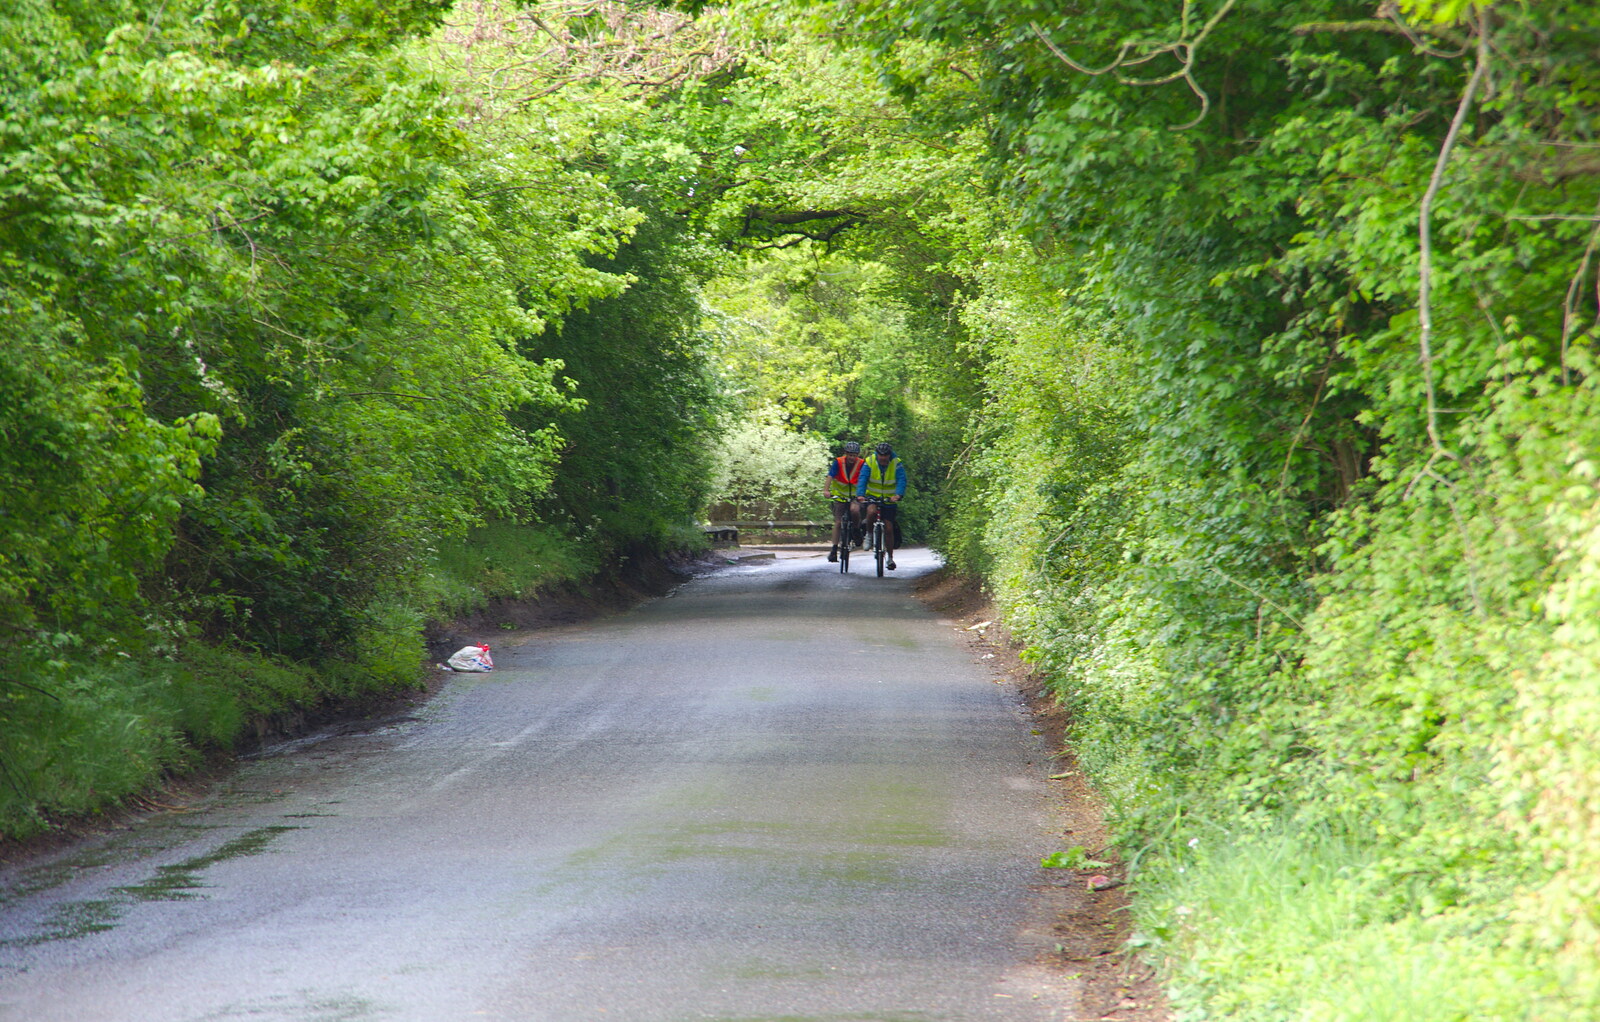 The BSCC Bike Ride 2019, Coggeshall, Essex - 11th May 2019: Matthew and Alan cycle up the road